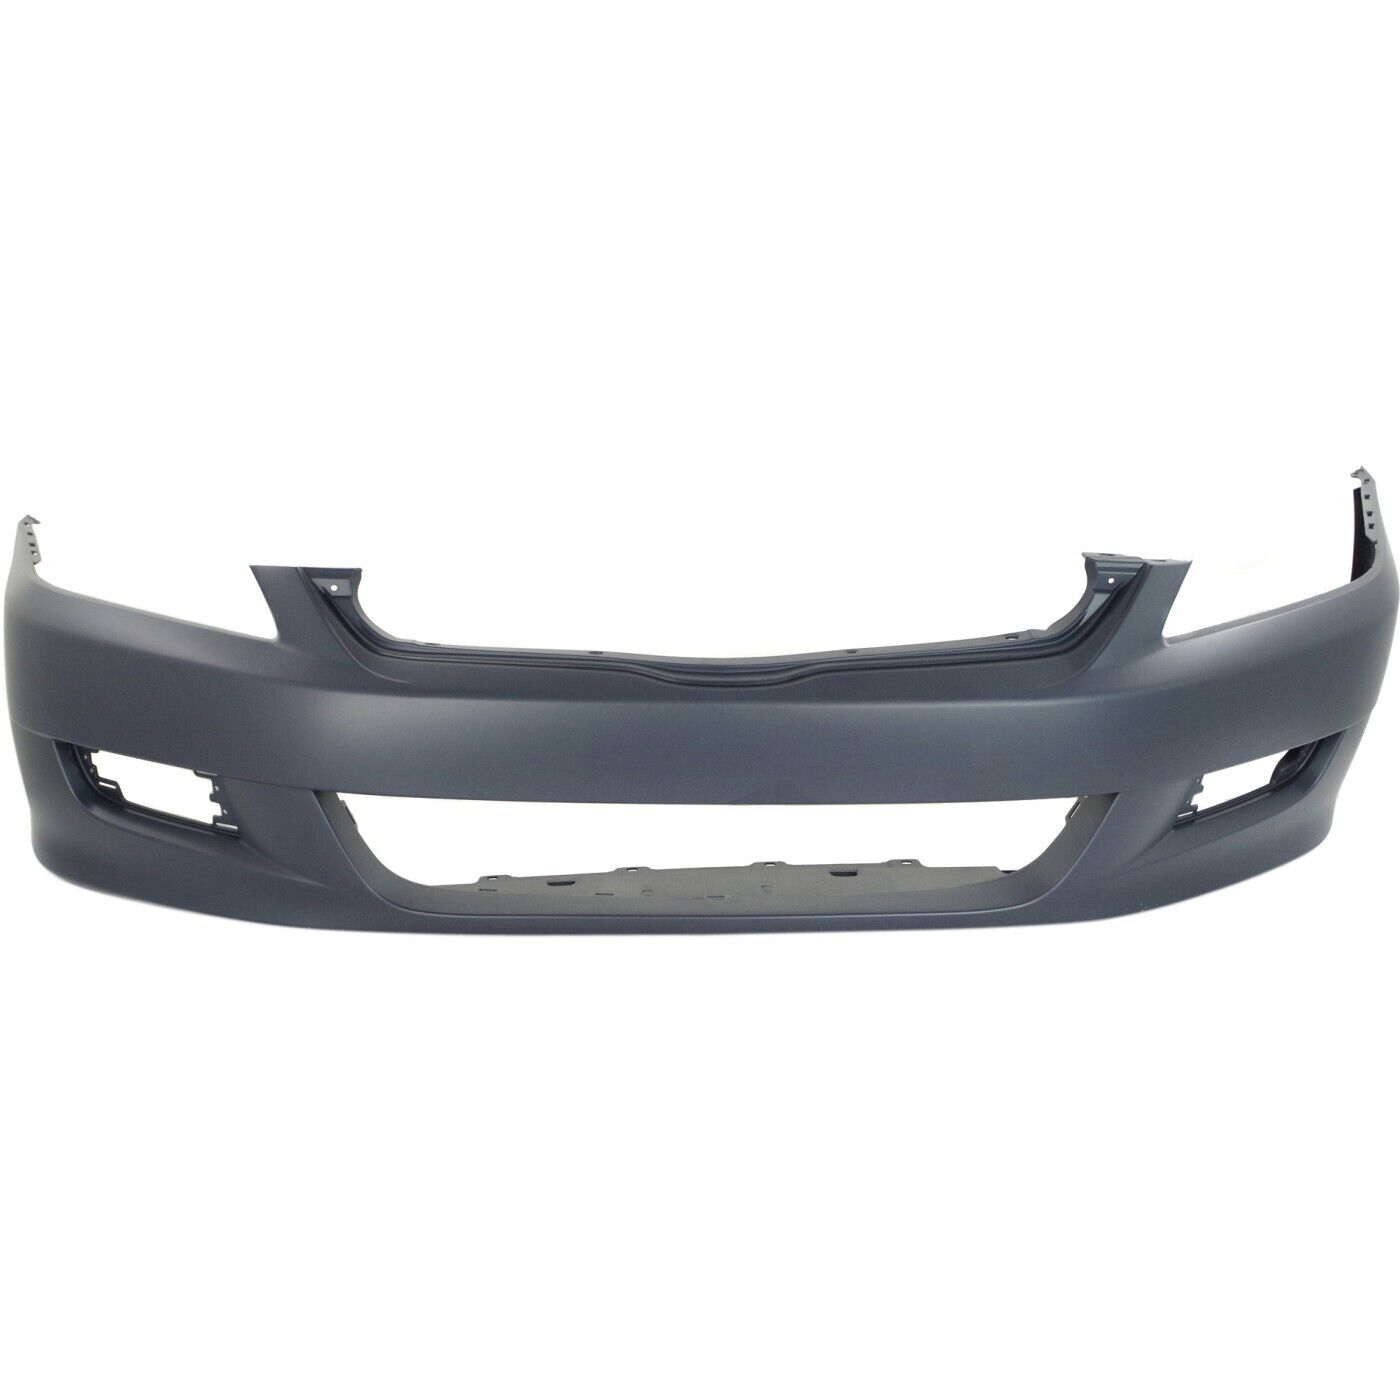 Front Bumper Cover For 2006-2007 Honda Accord Coupe w/ fog lamp holes Primed